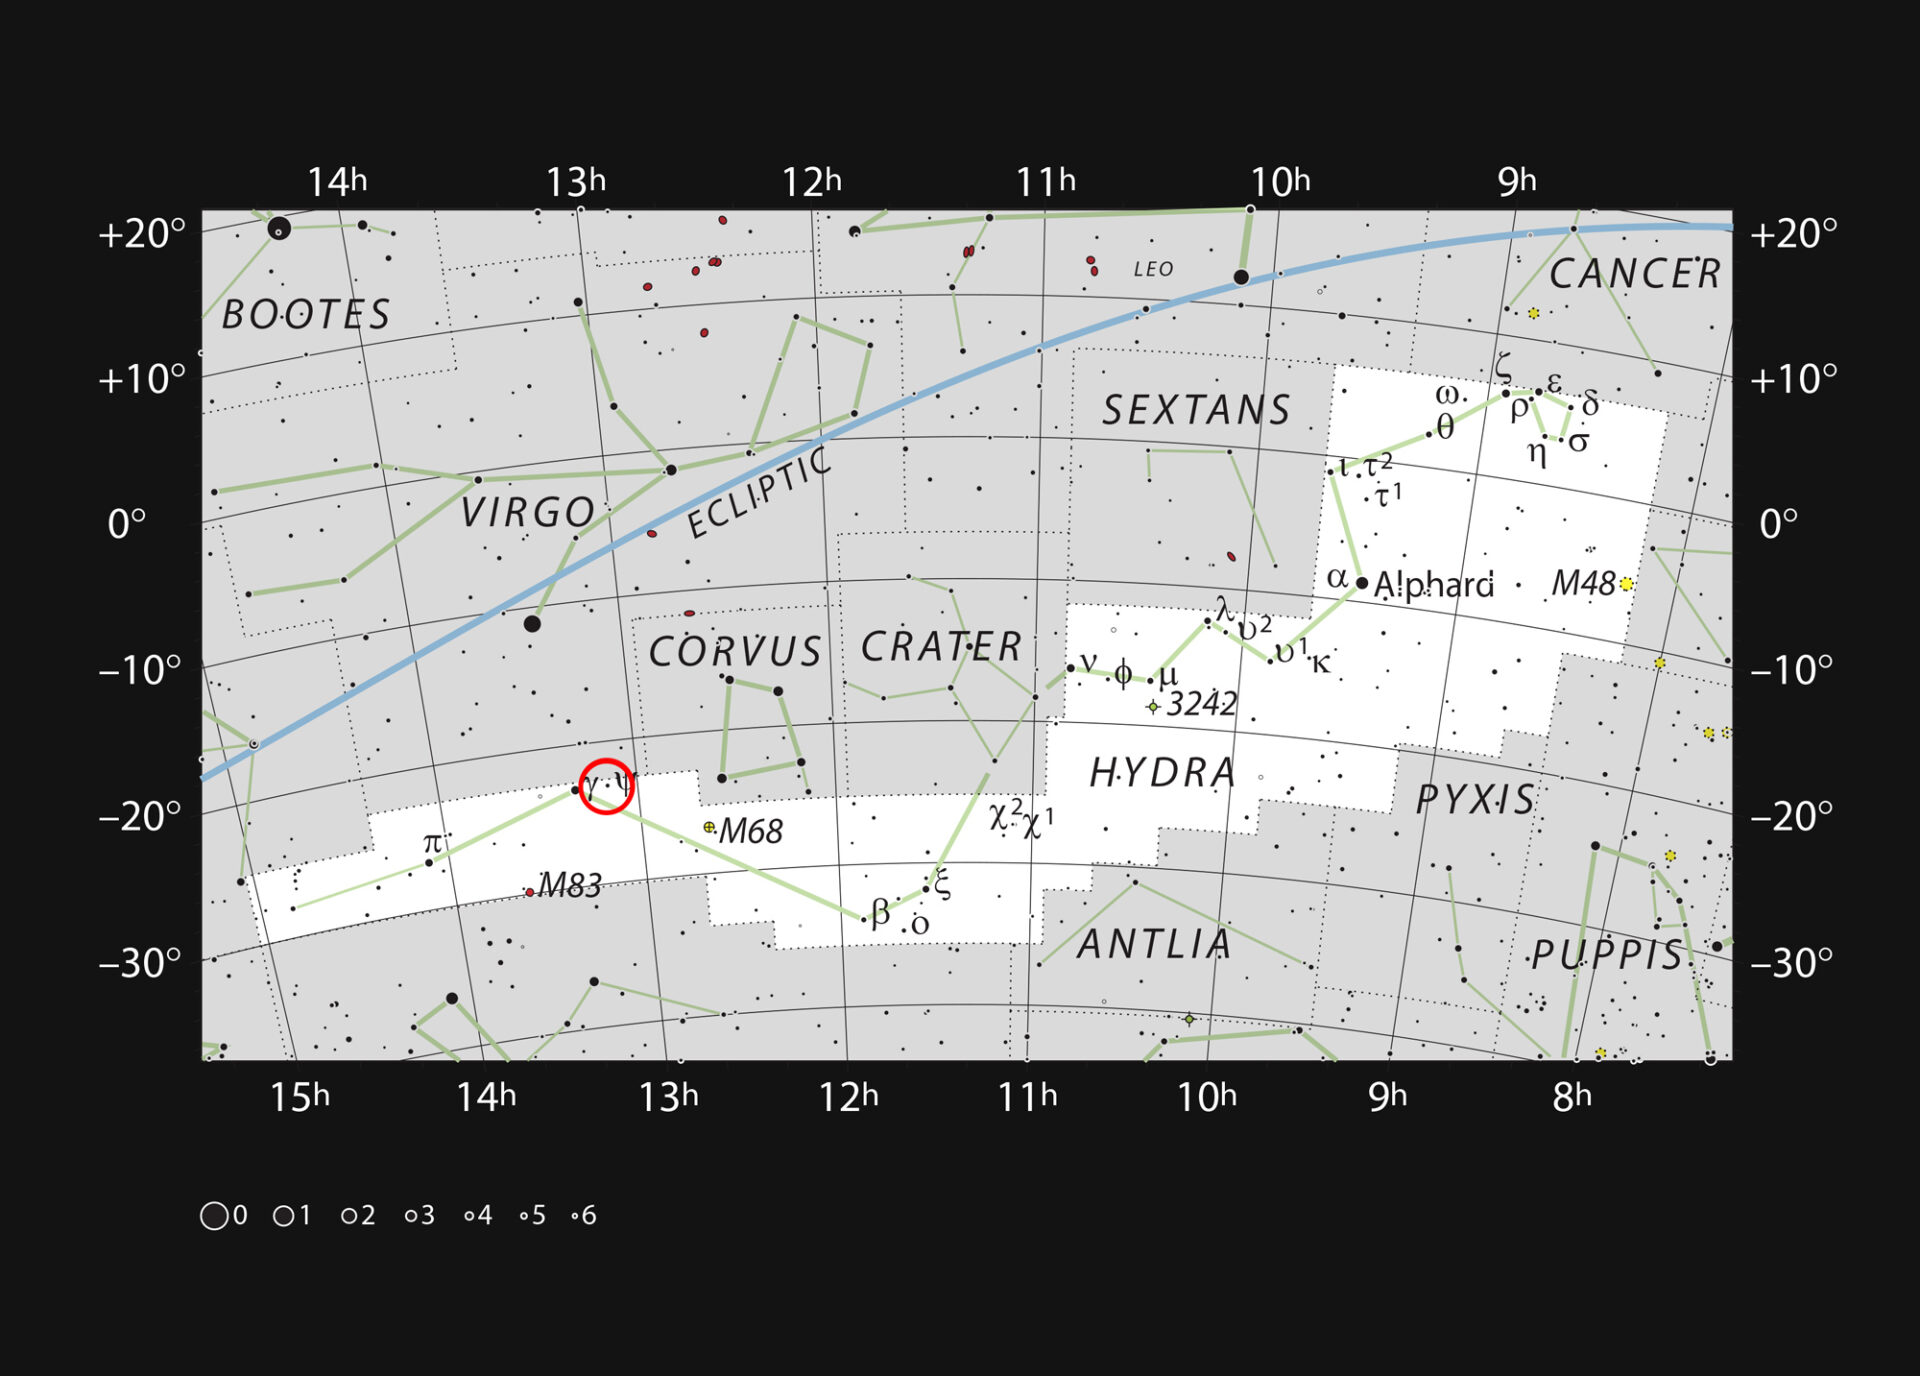 <p>This chart shows the sprawling constellation of Hydra (The Female Sea Serpent), the largest and longest constellation in the sky. Most stars visible to the naked eye on a clear dark night are shown. The red circle marks the position of the galaxy NGC 4993, which became famous in August 2017 as the site of the first gravitational wave source that was also identified in light visible light as the kilonova GW170817. NGC 4993 can be seen as a very faint patch with a larger amateur telescope.</p>
<p>Credit: ESO, IAU and Sky & Telescope</p>
